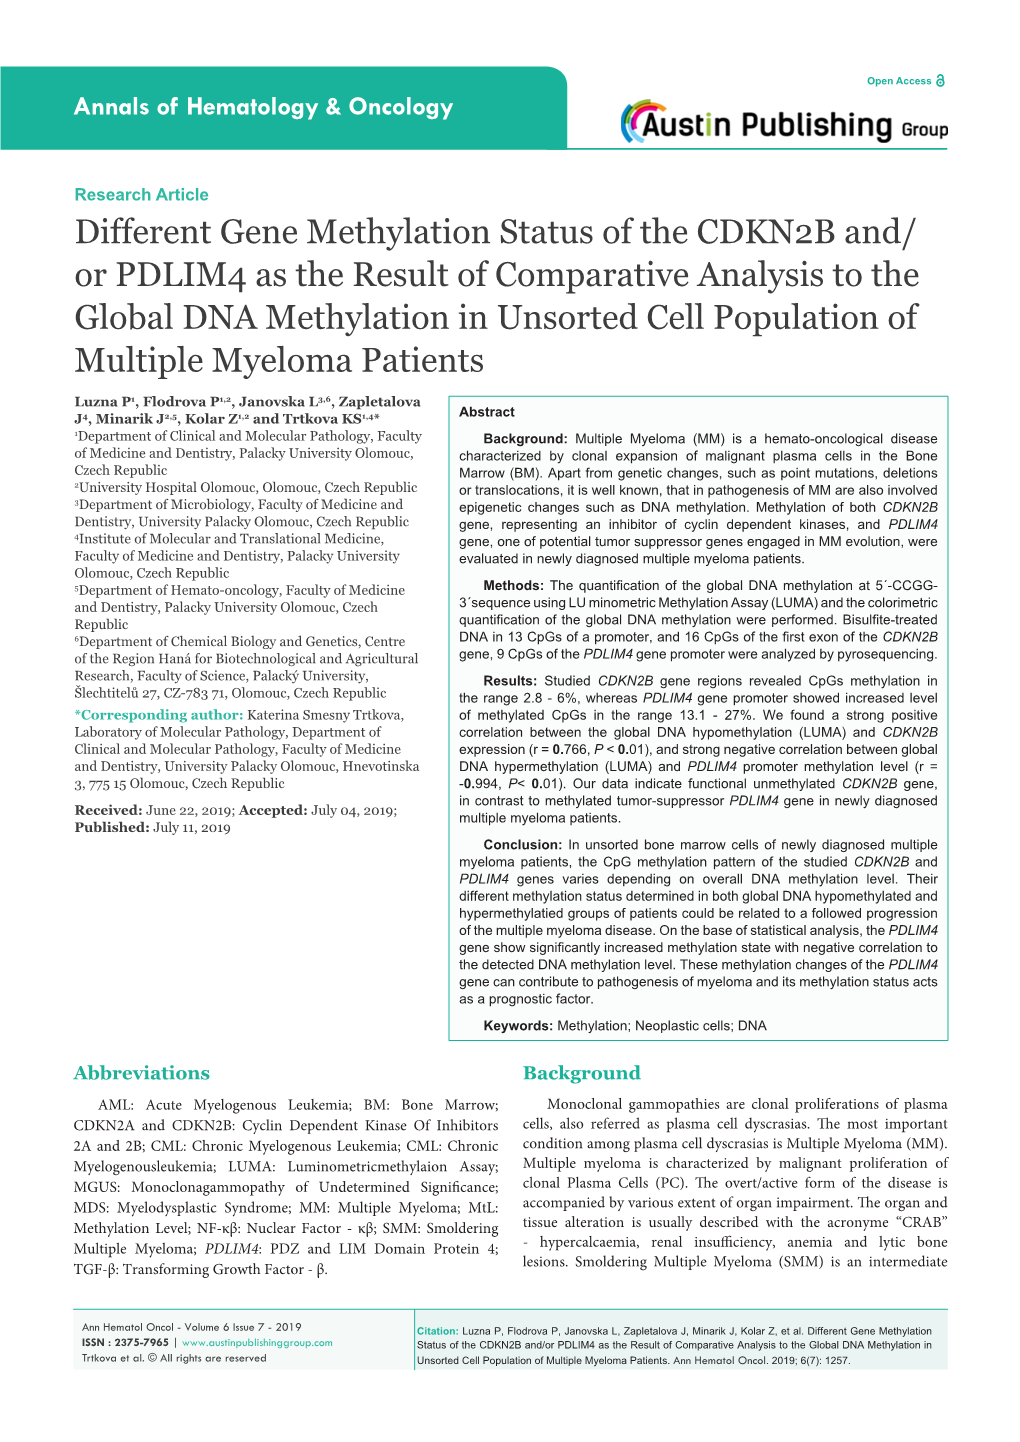 Different Gene Methylation Status of the CDKN2B And/Or PDLIM4 As The